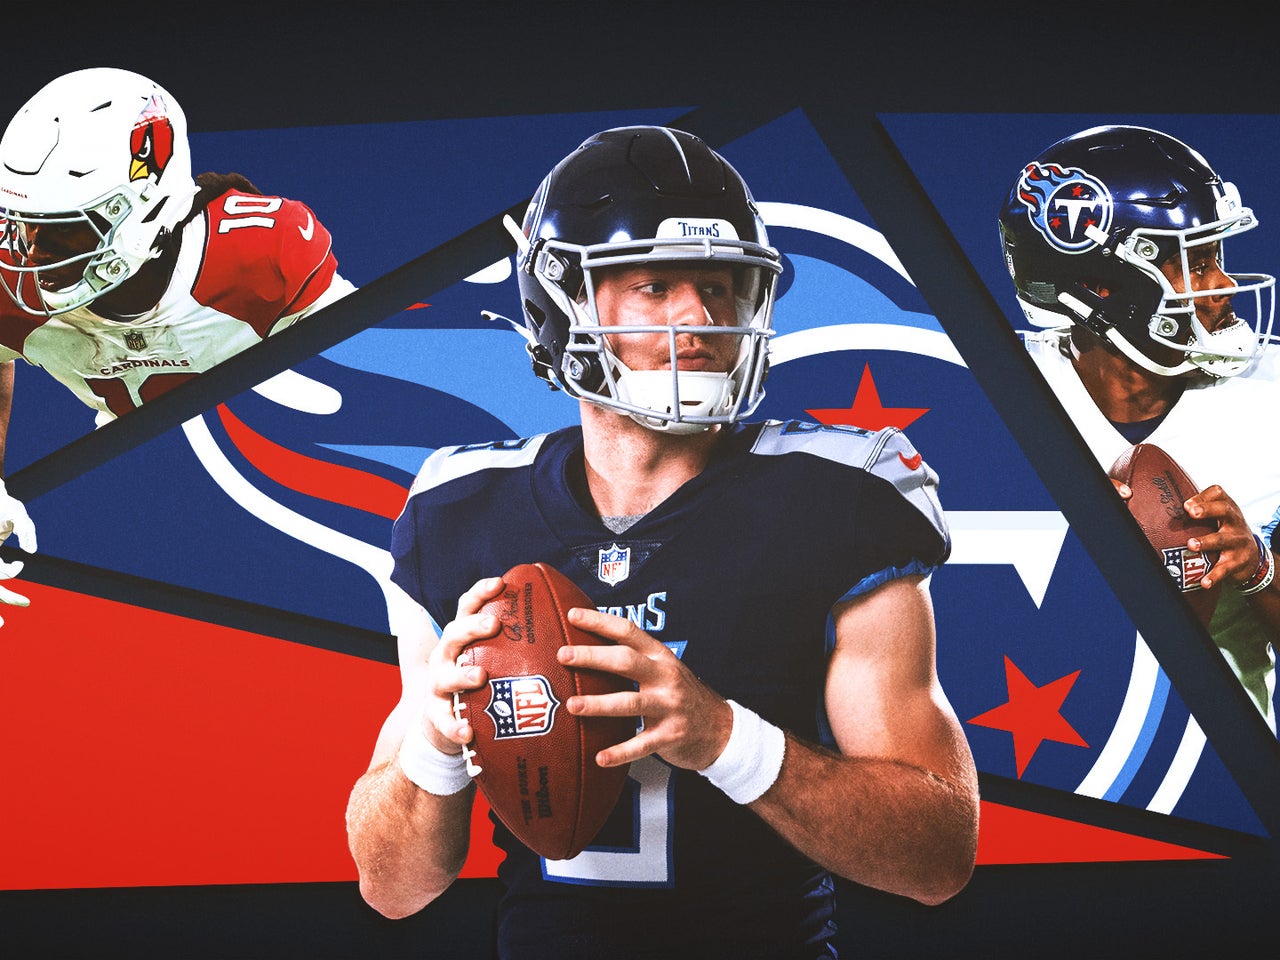 Titans 2022 Training Camp Preview: A Look at the Quarterbacks